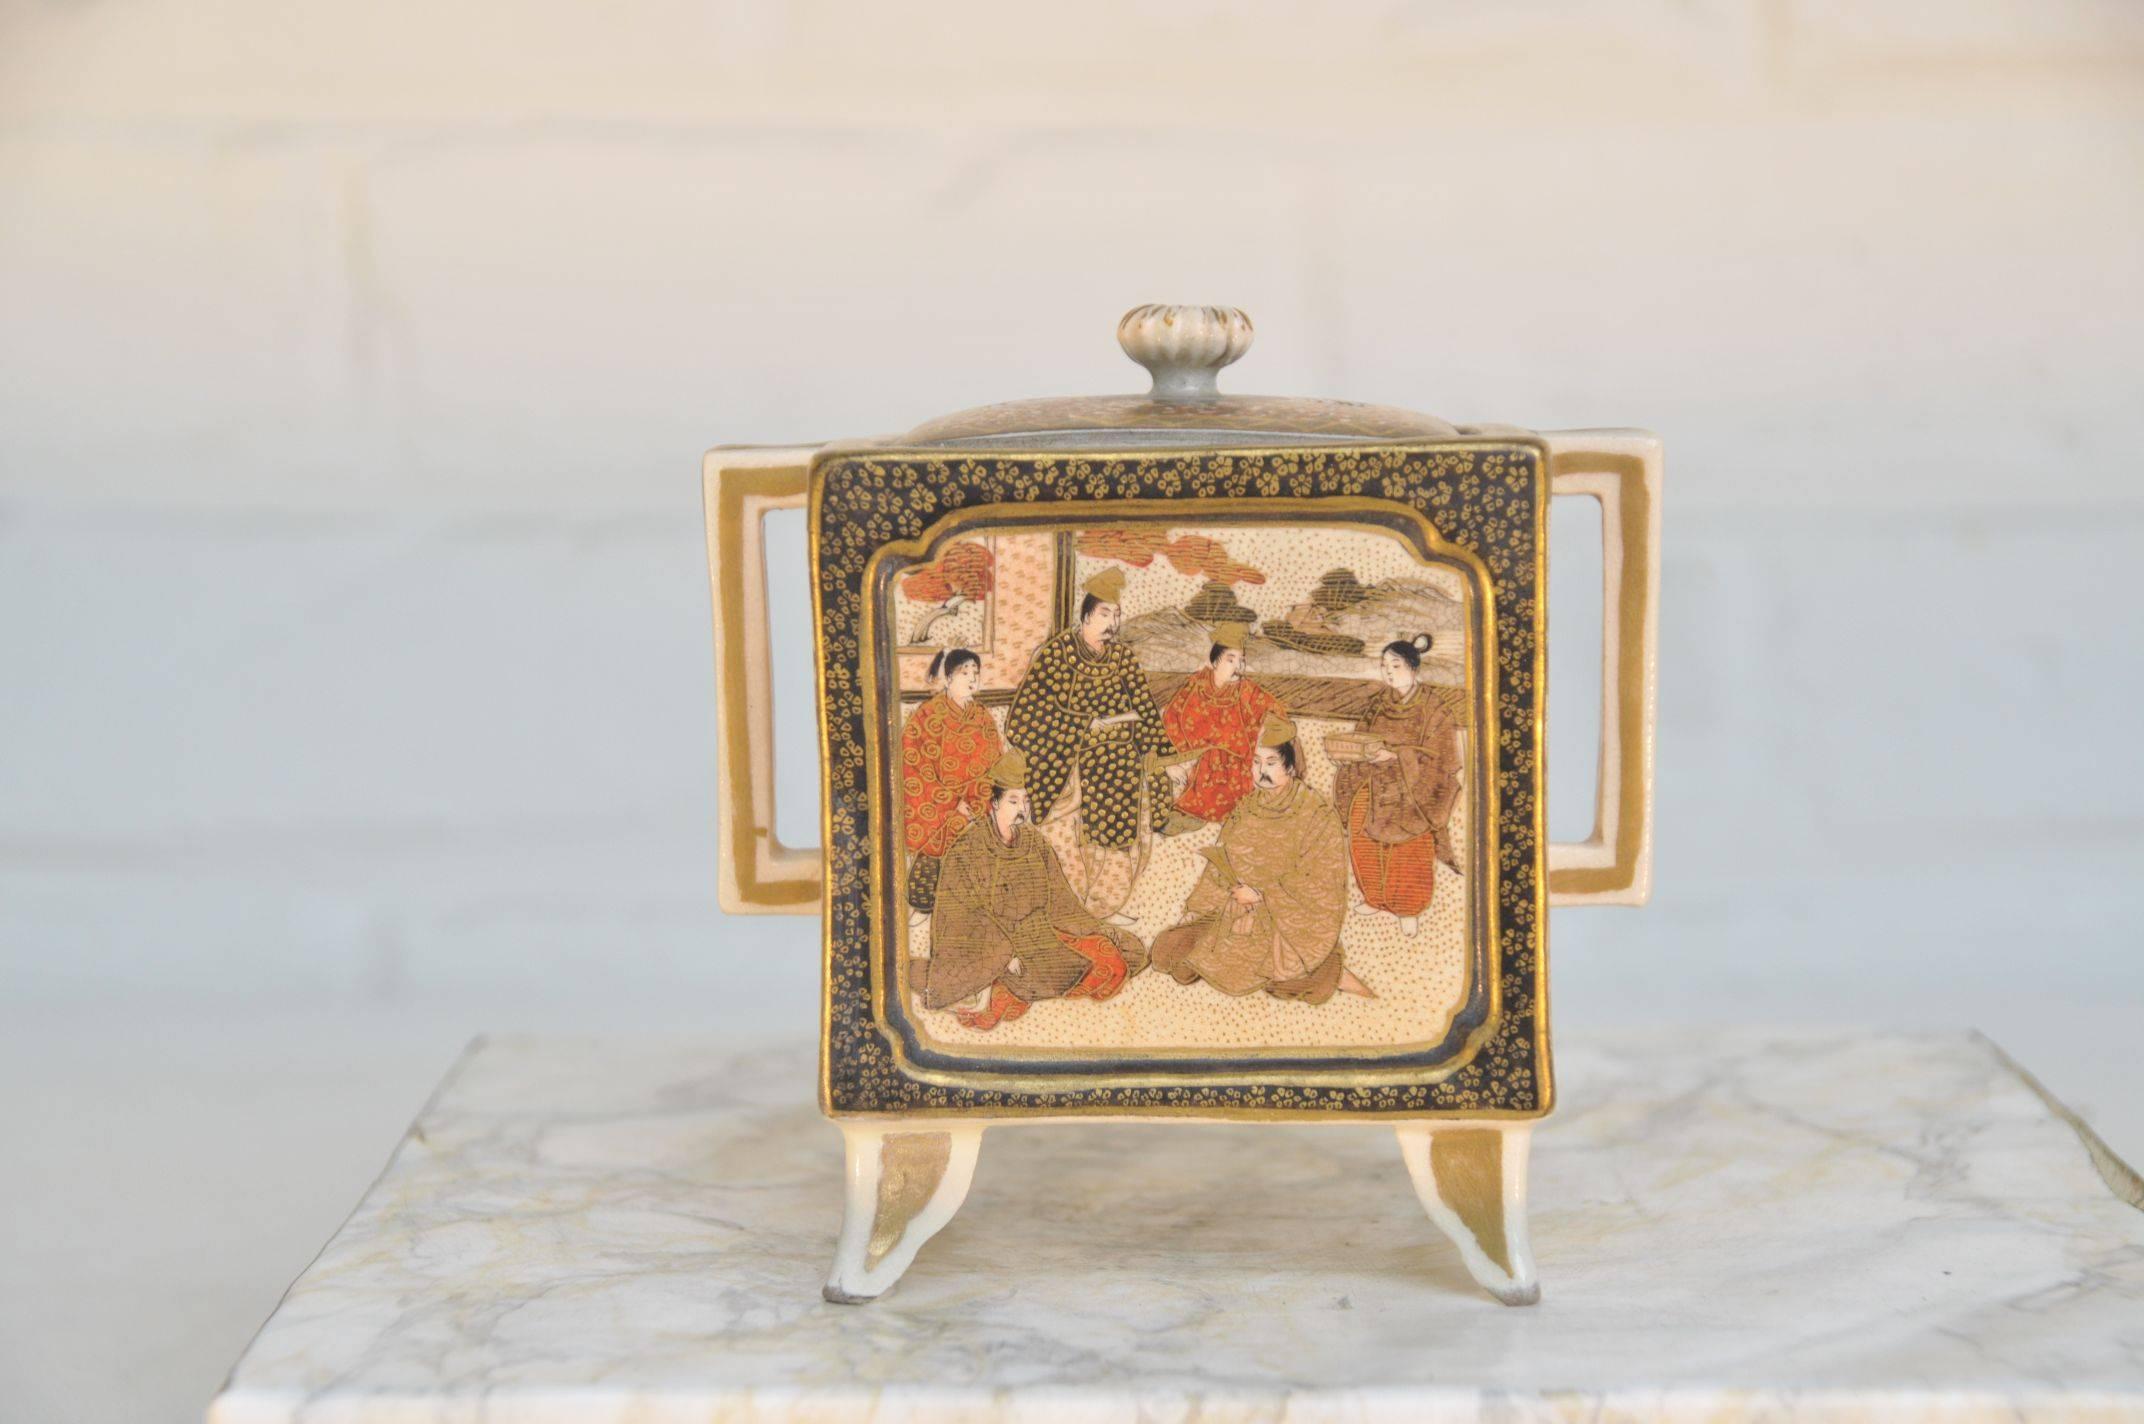 Meiji period, 19th century, marked in under glaze gilt.
The square body decorated in bright enamels and heightened in gilt, with an audience scene to front and the back alternately depicting dignitaries and ladies. Set with square shaped handles on